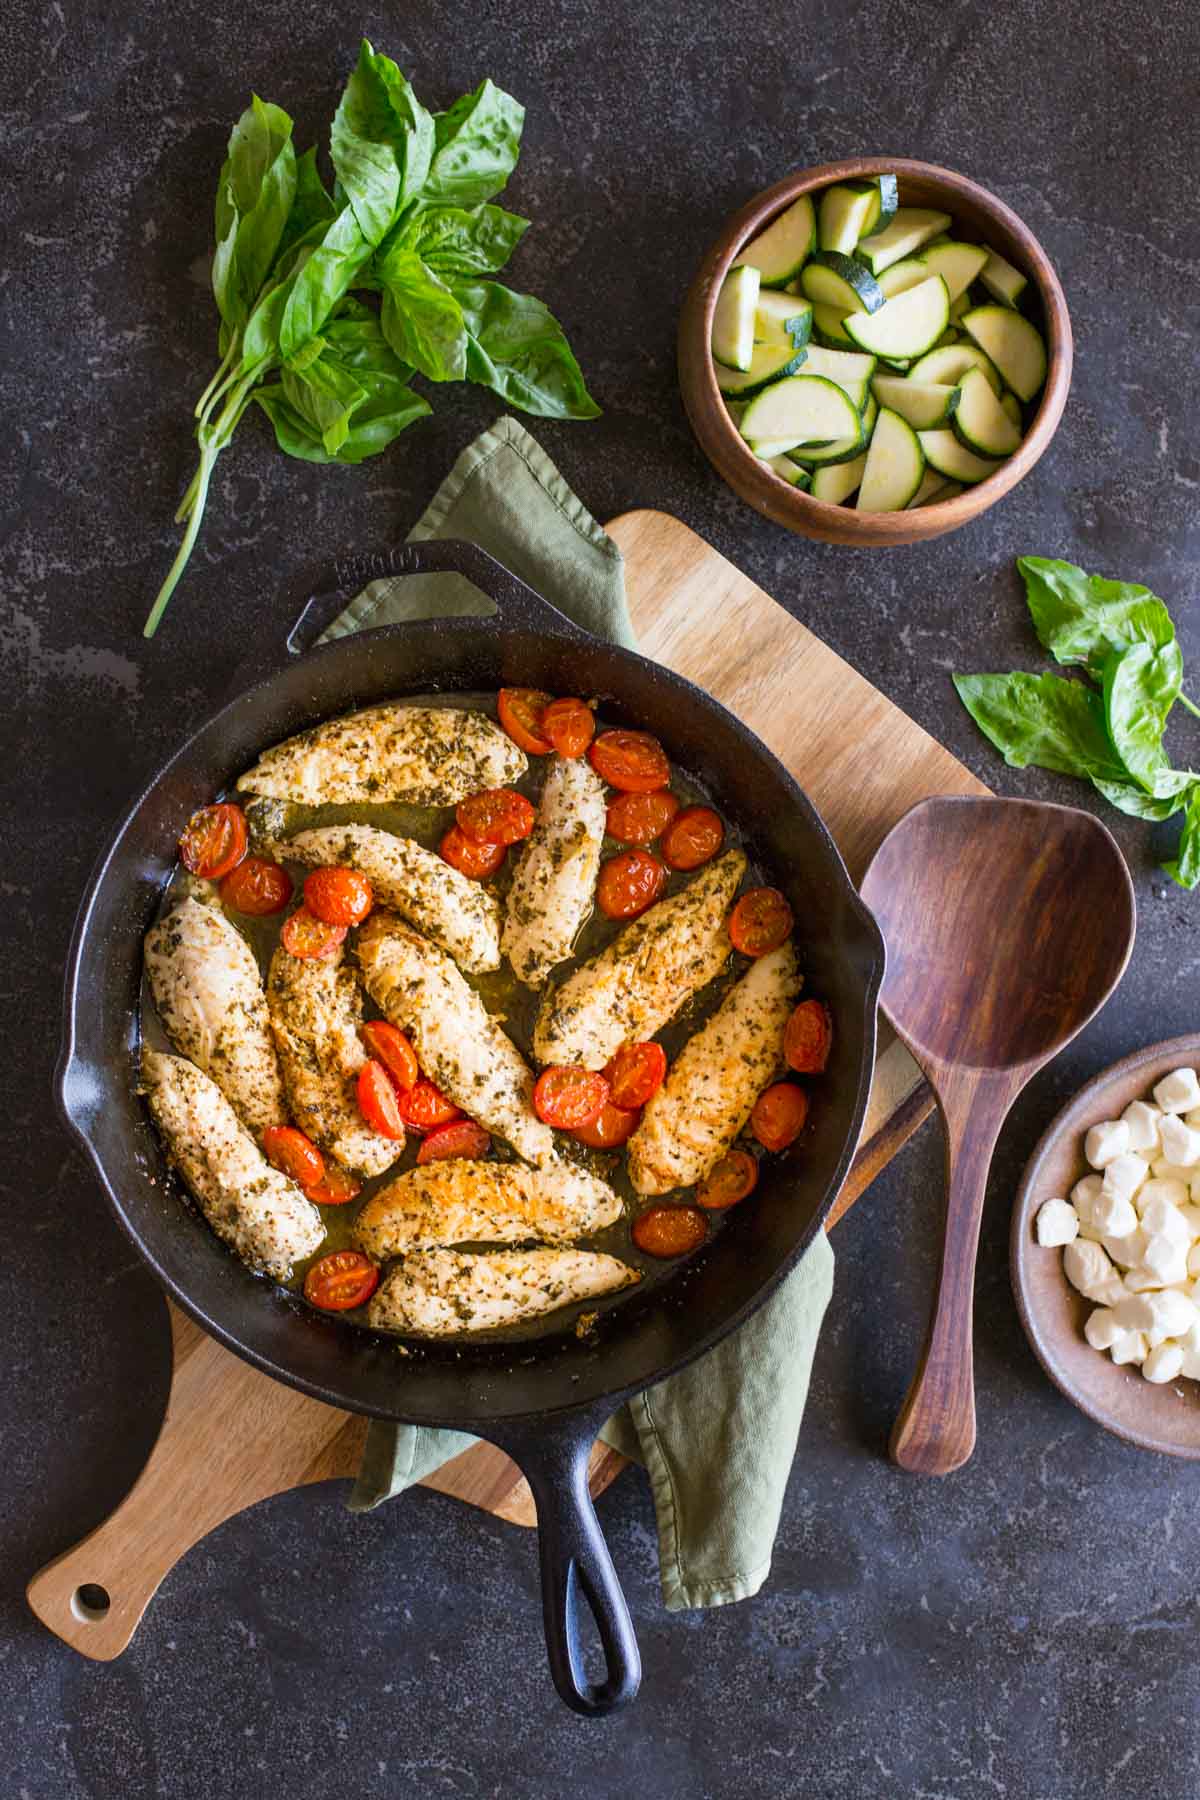 Cooked chicken and caramelized cherry tomatoes in a cast iron skillet, with some fresh basil, a bowl of sliced zucchini, a bowl of fresh mozzarella pearls and a wooden spoon next to the skillet, all to make the Pesto Chicken Skillet.